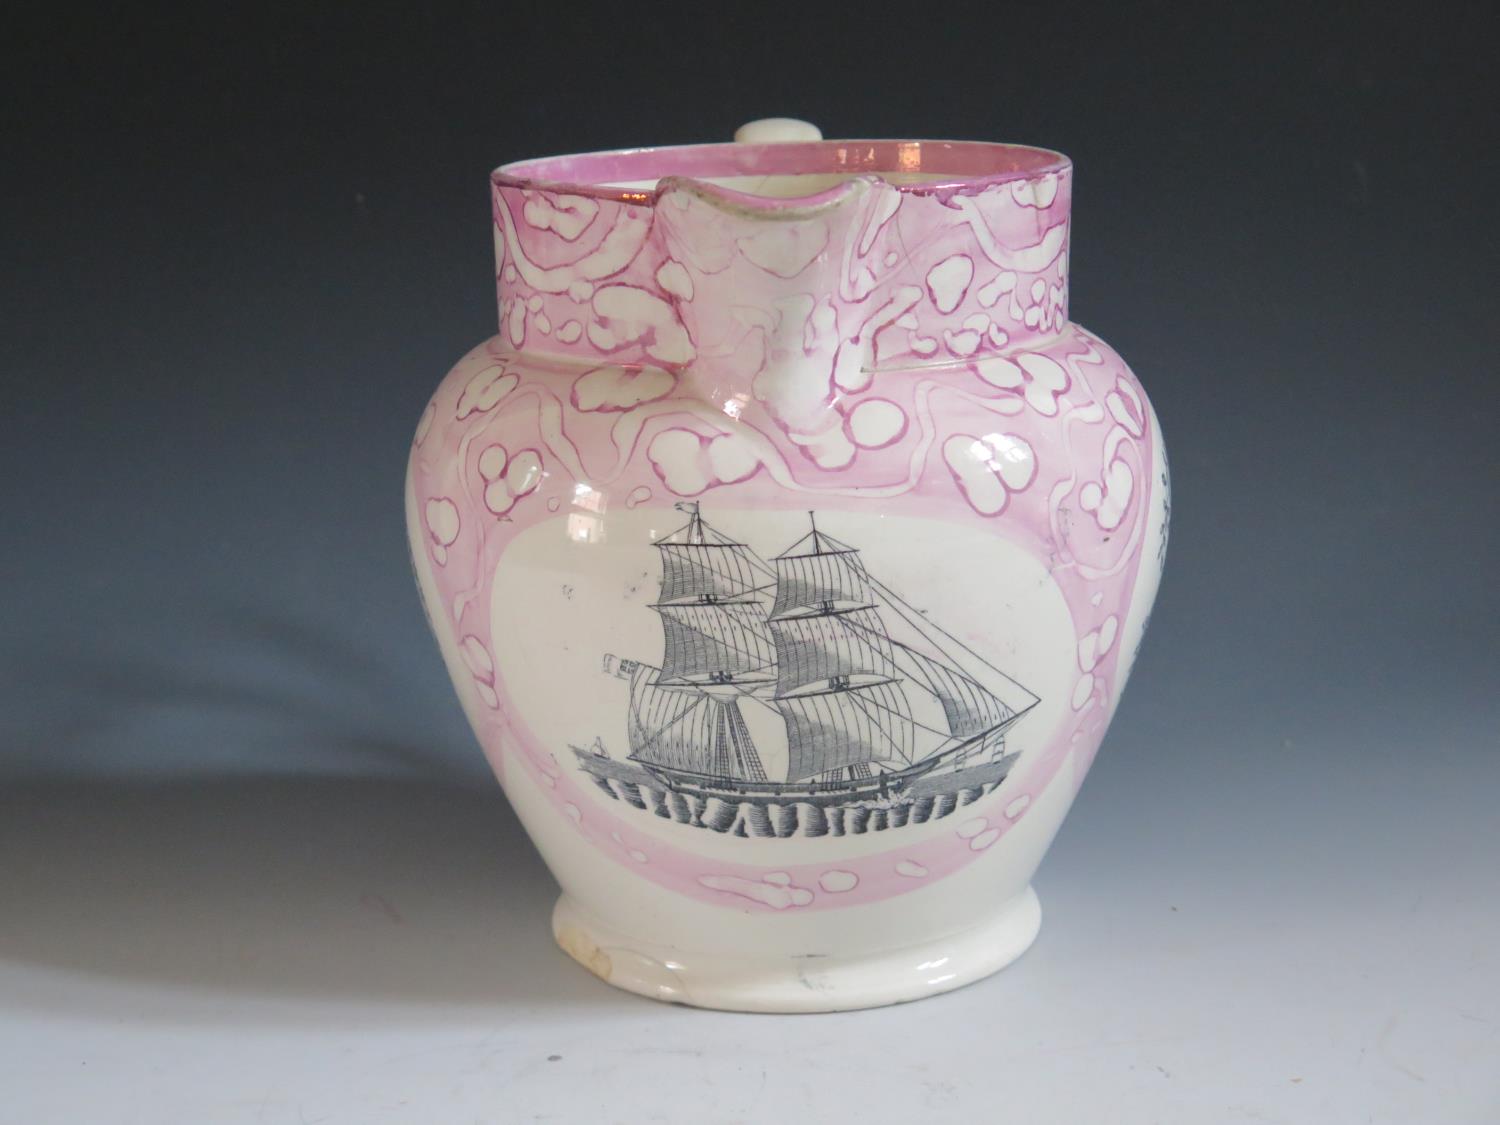 A Sunderland Lustre Jug with monochrome decoration of a three masted ship and flanked by poetic